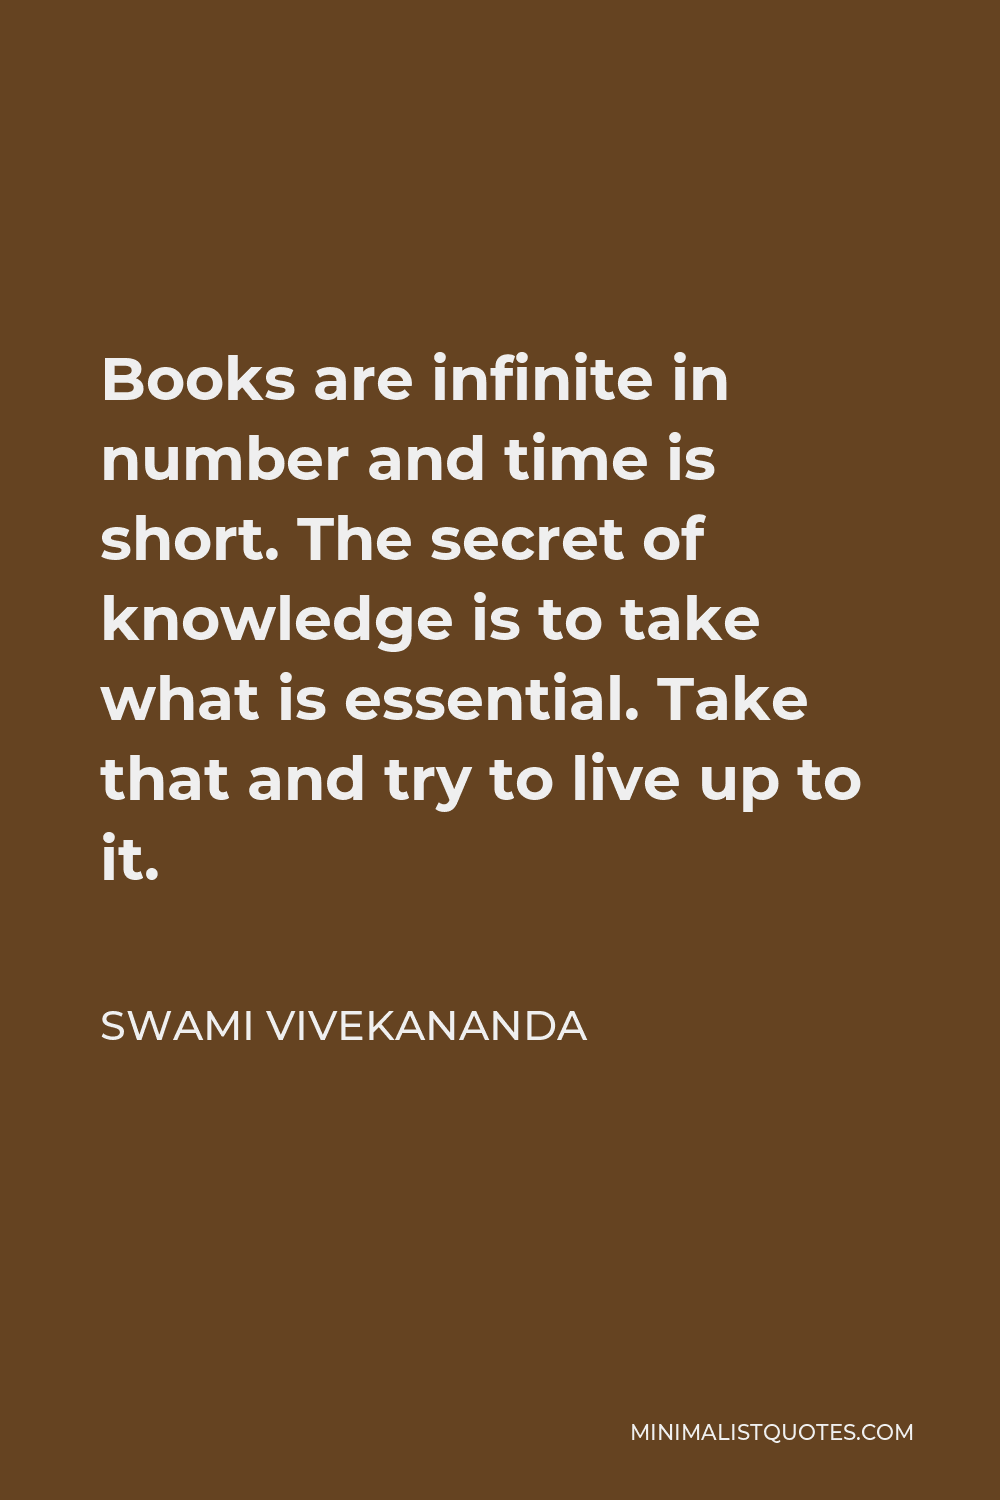 Swami Vivekananda Quote - Books are infinite in number and time is short. The secret of knowledge is to take what is essential. Take that and try to live up to it.